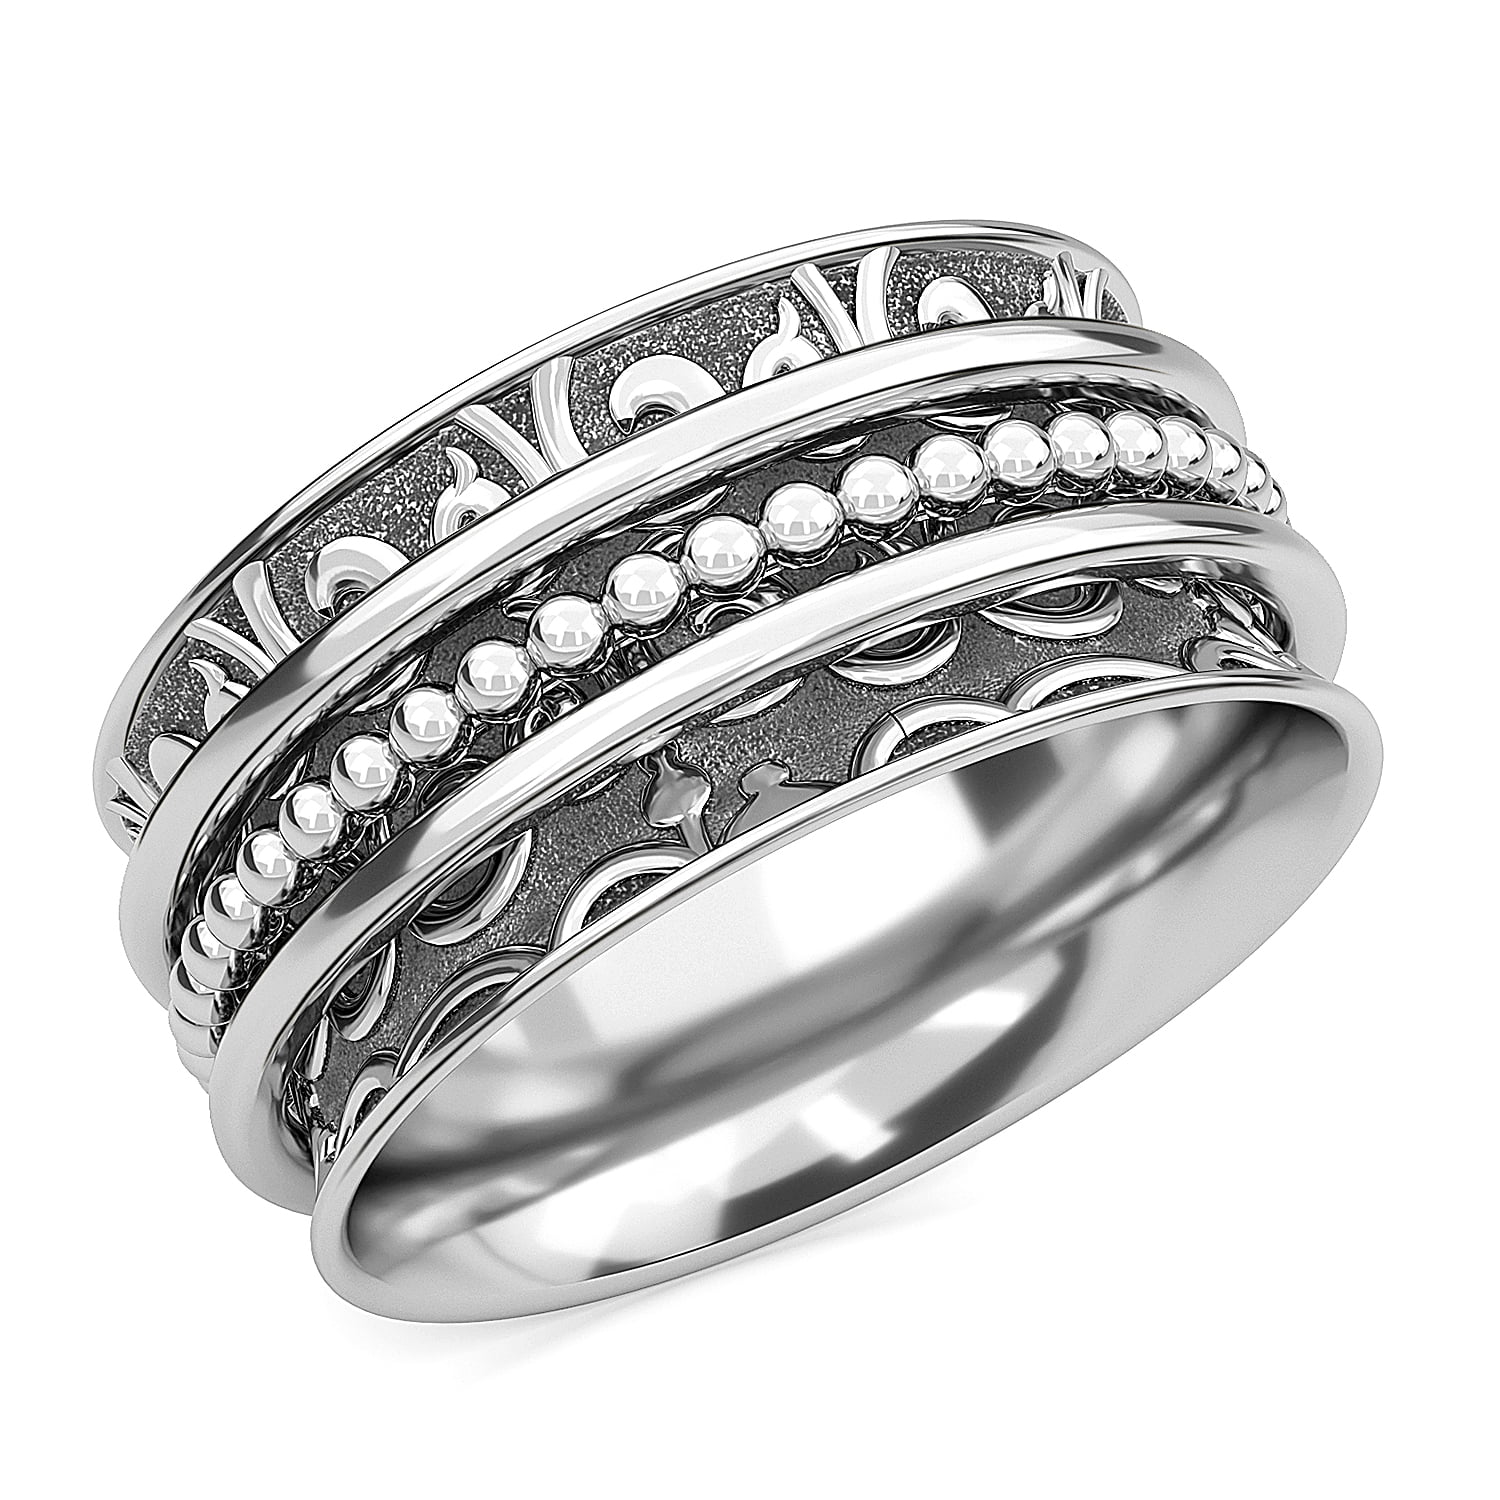 Spinner Ring Band ring Meditation Ring 925 Sterling Silver Ring Rings for Women Worry Ring, Silver Spinner Rings Multi Silver Band